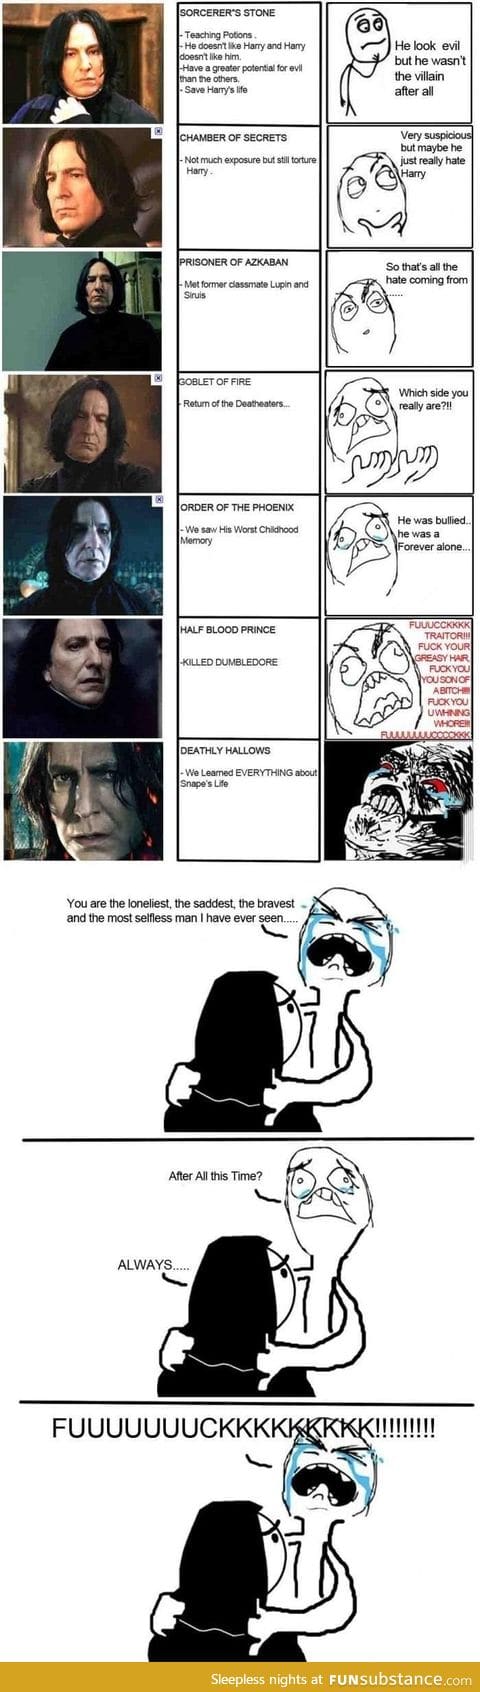 Snape throughout the series